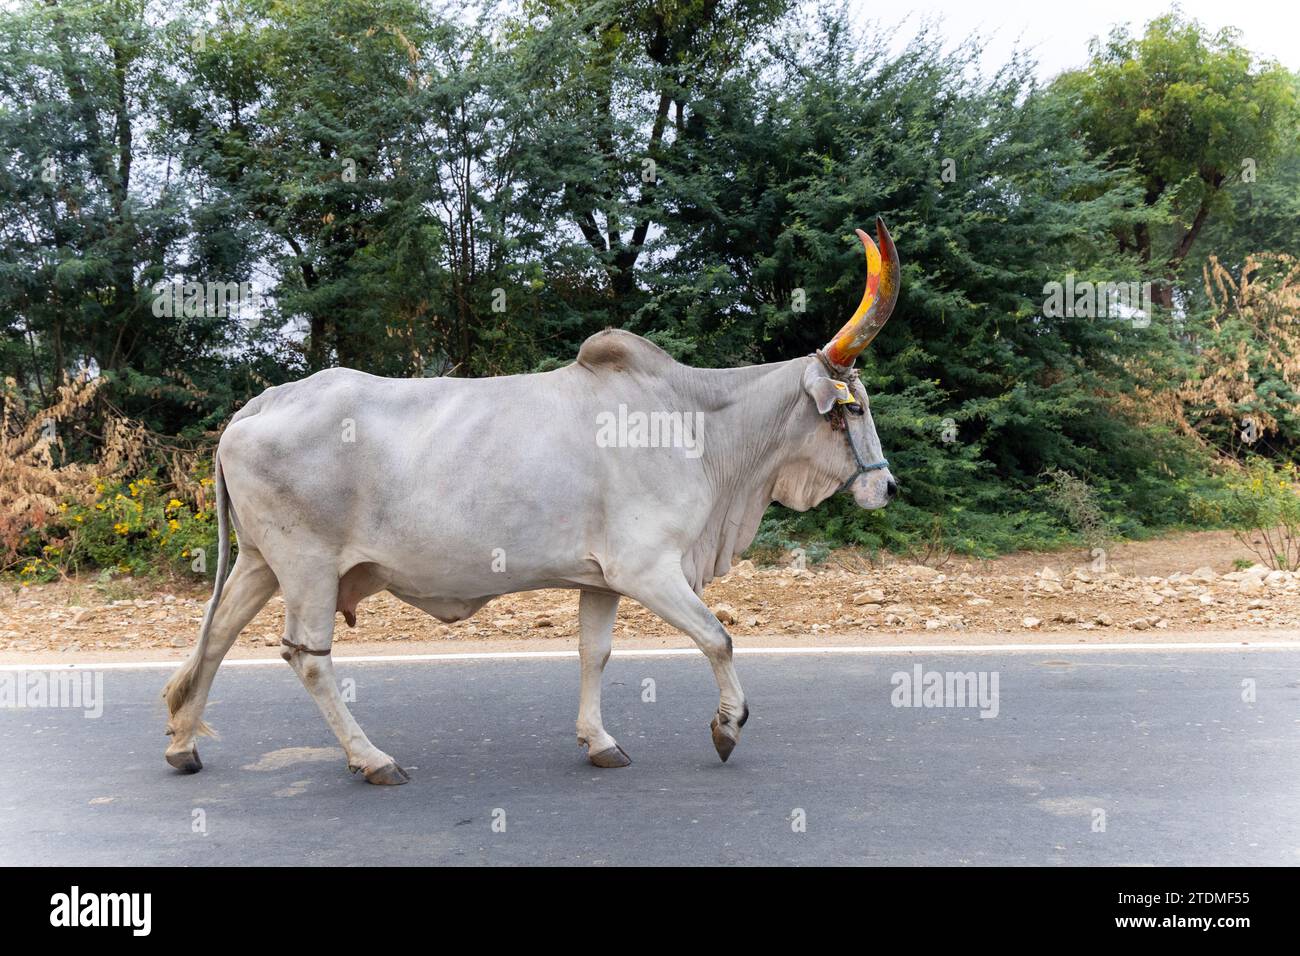 cow with big horn at road at evening from flat angle Stock Photo